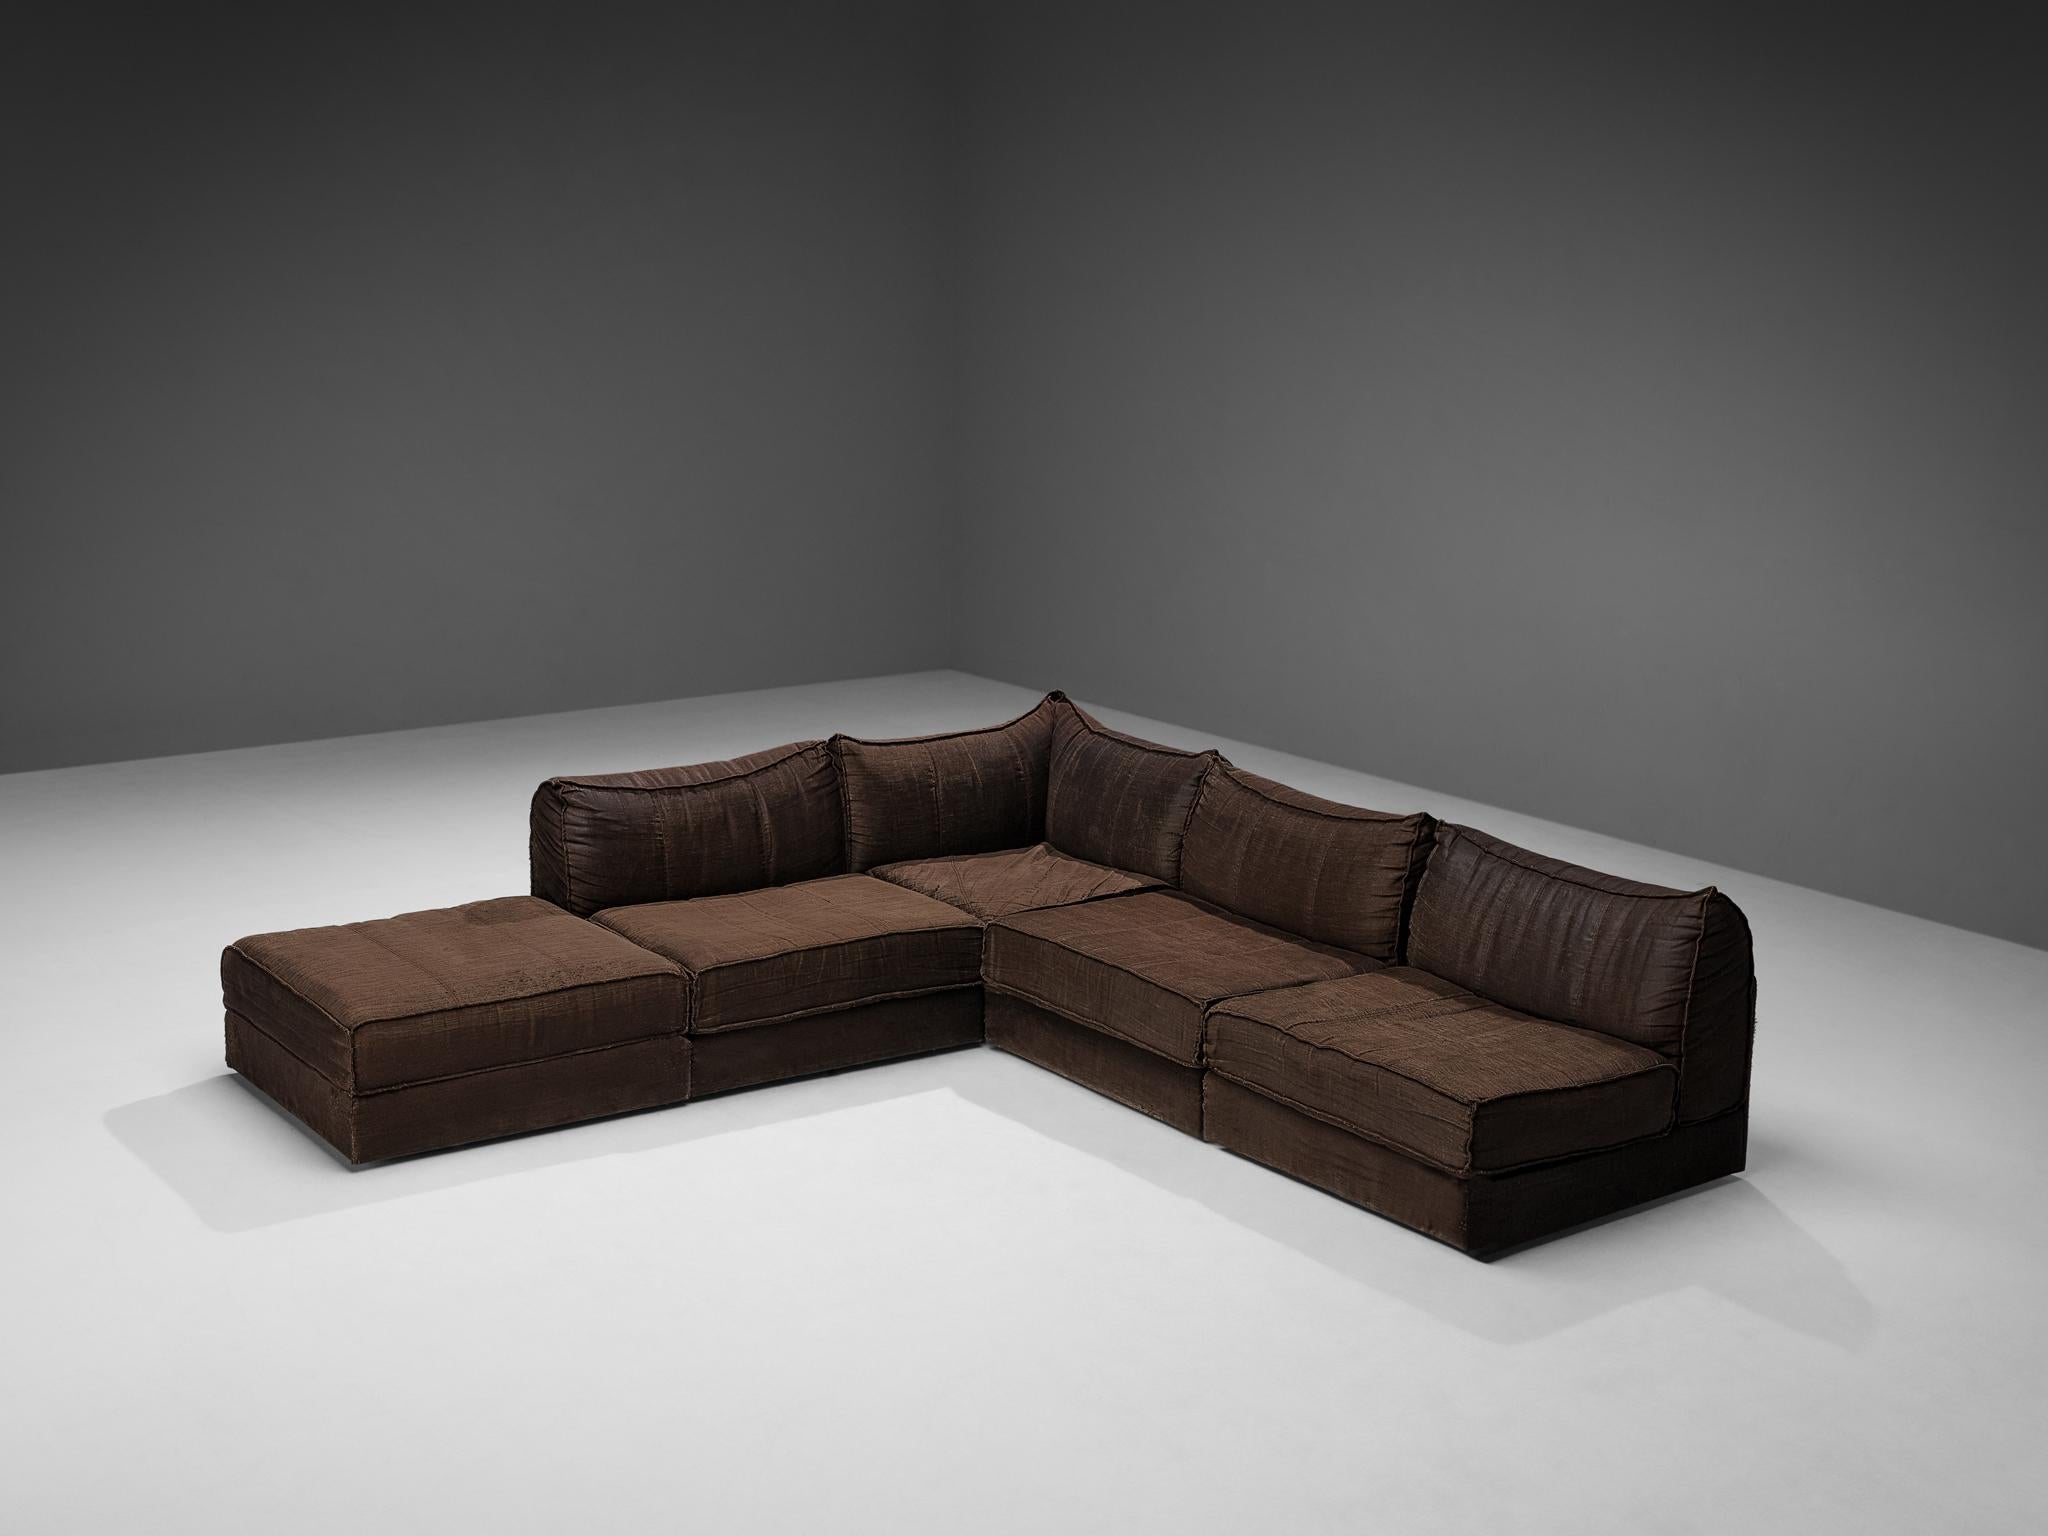 Sectional sofa, fabric, Europe, 1970s

This high-quality sectional sofa contains three regular elements, one corner element, and one ottoman, making it possible to arrange this sofa to your own wishes. The design is characterized by voluminous